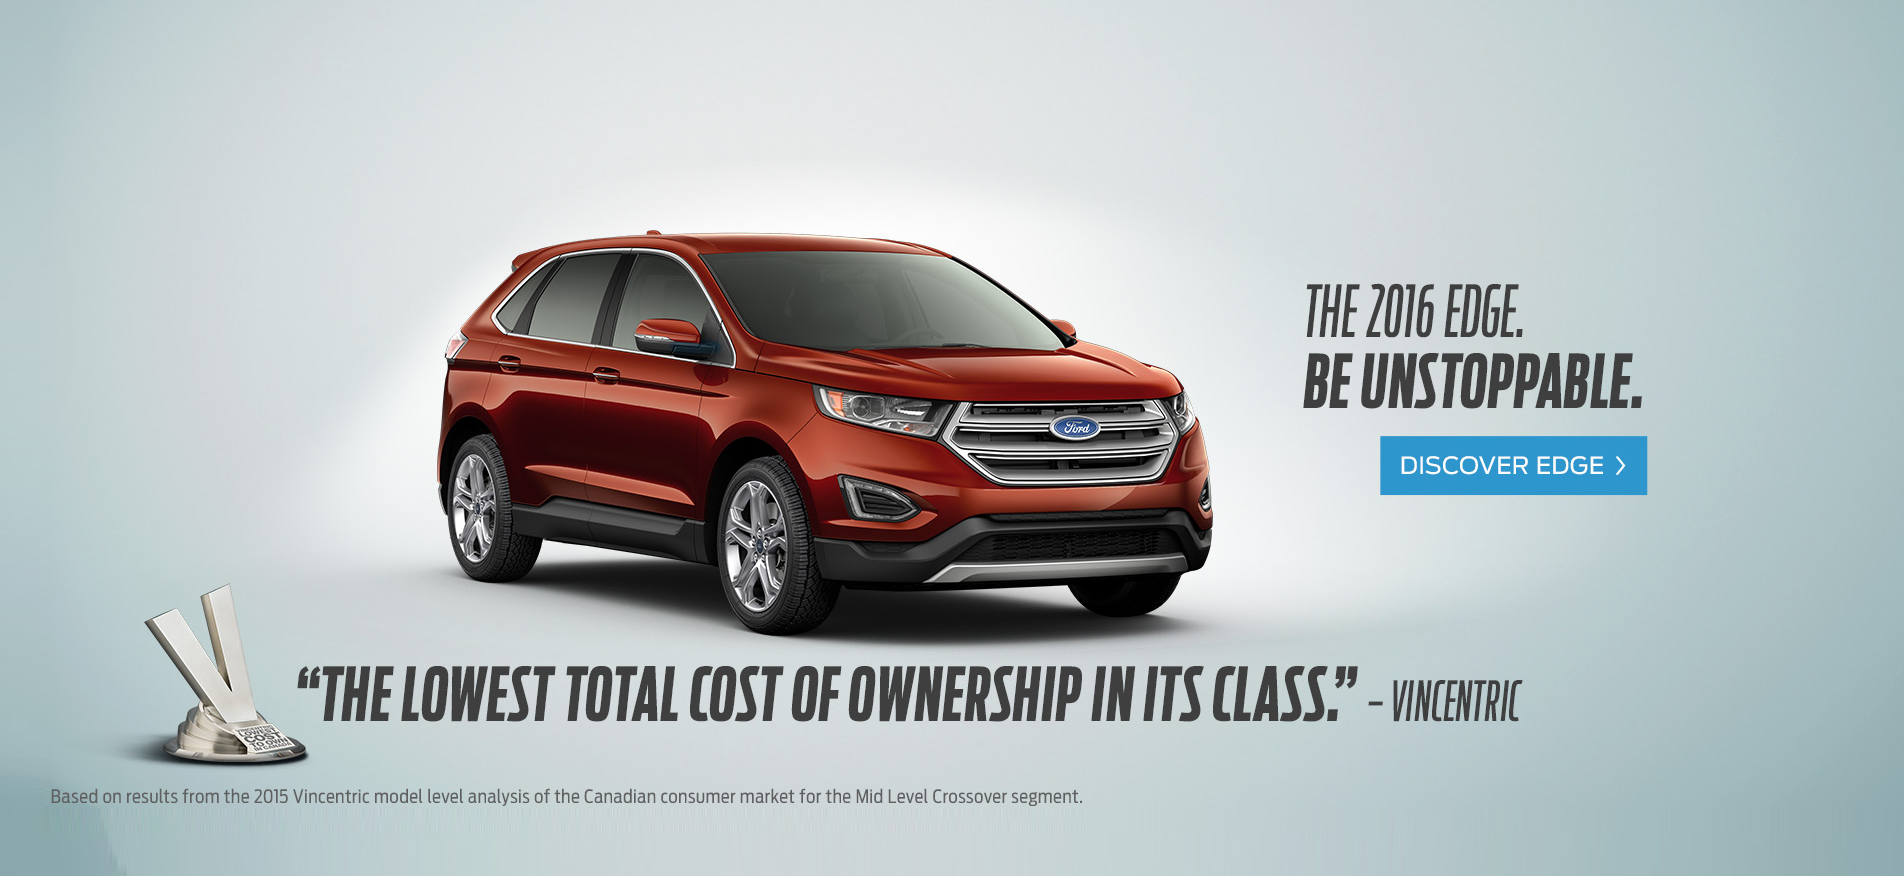 Brant county ford service #3